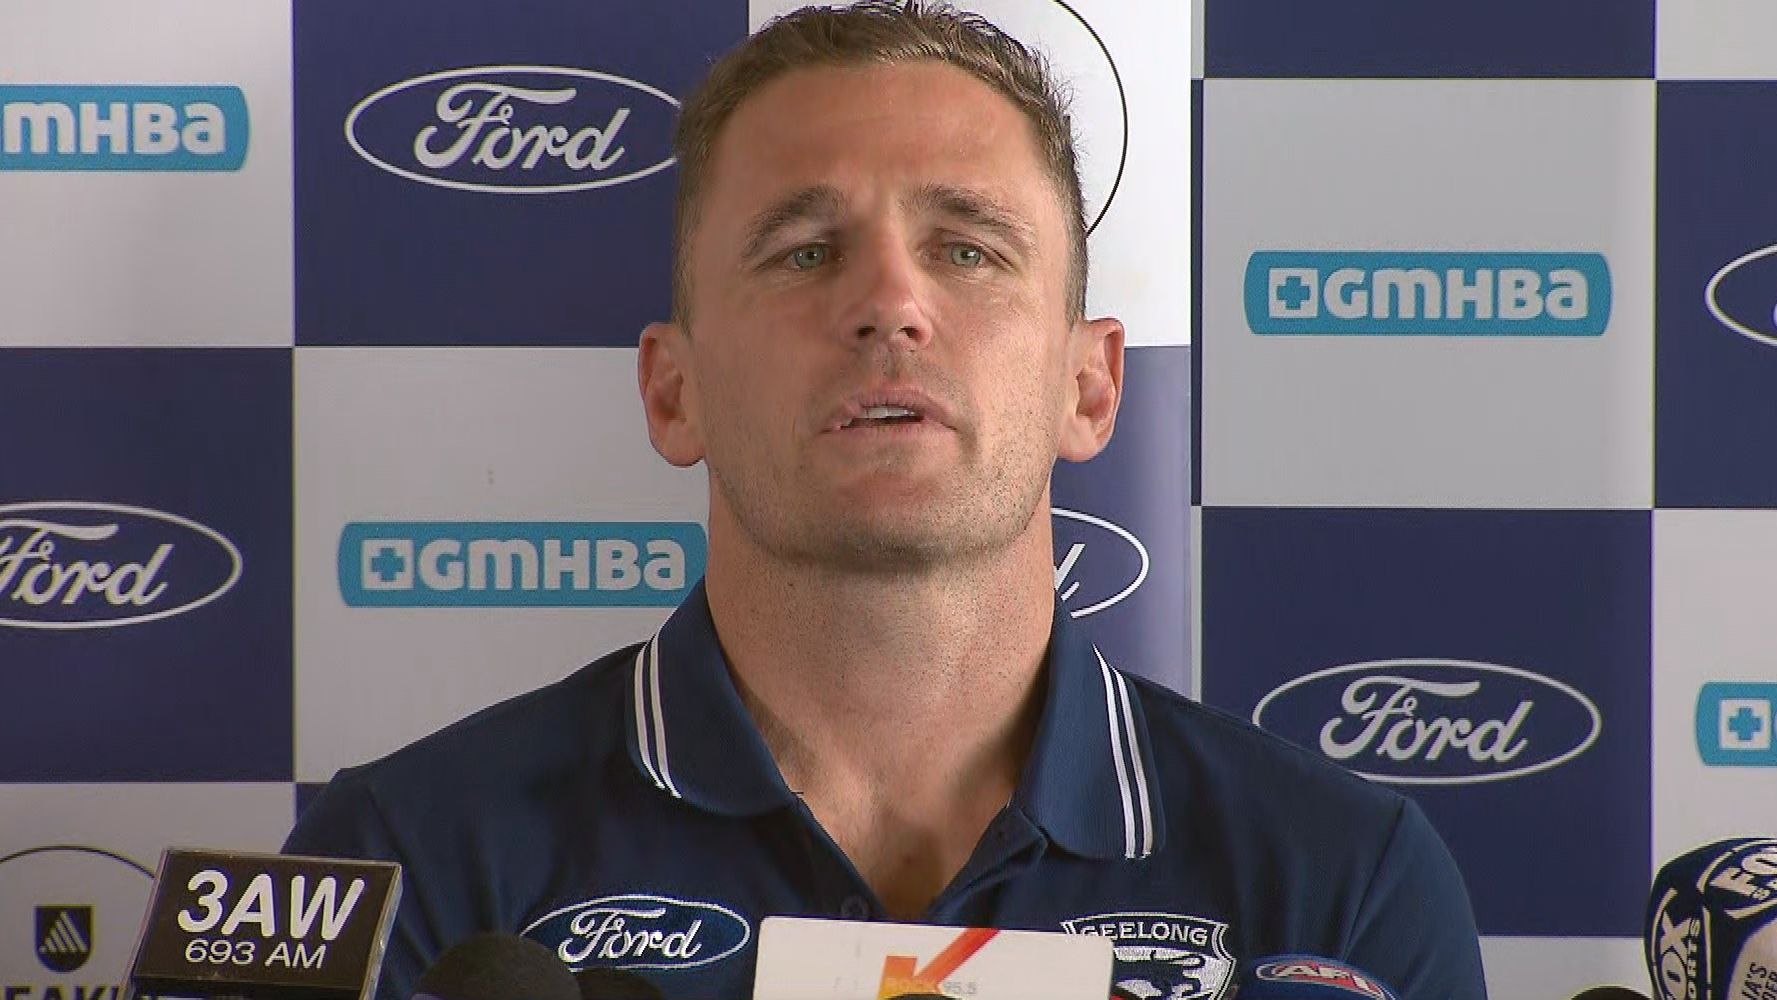 Geelong Cats captain Joel Selwood announces his retirement from the AFL.